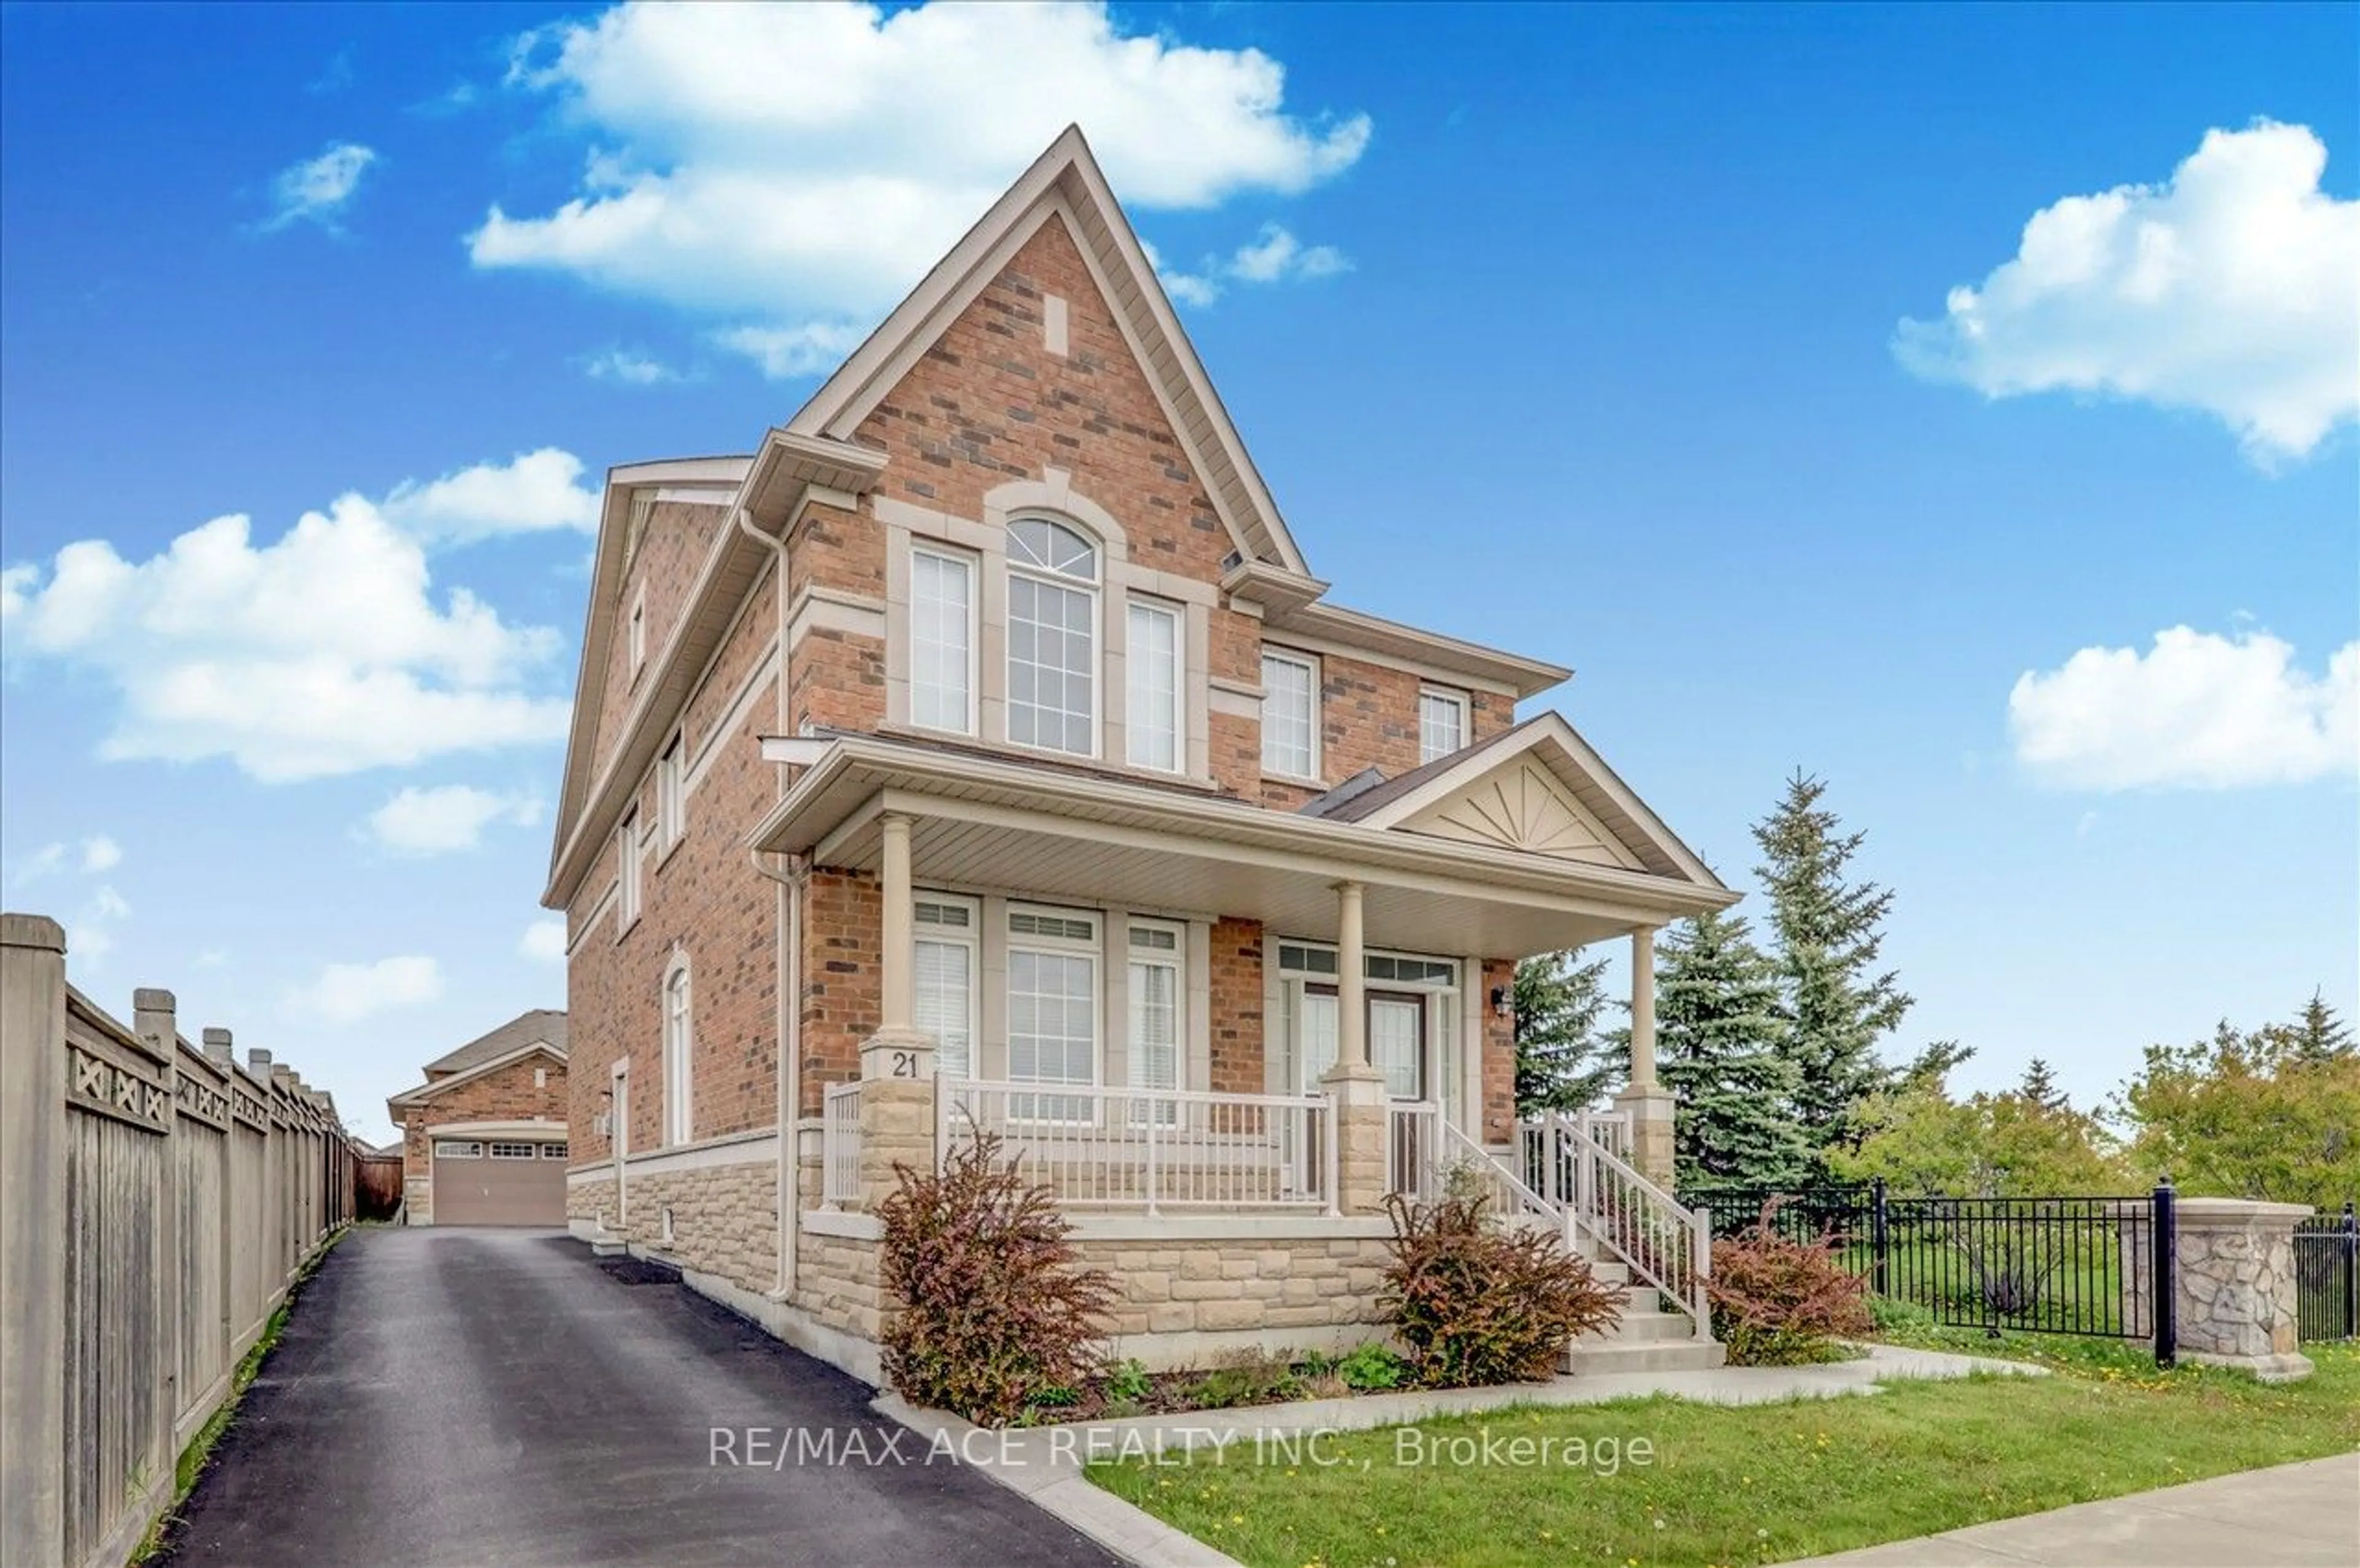 Home with brick exterior material for 21 Castle Oaks Crossing, Brampton Ontario L6P 0B5